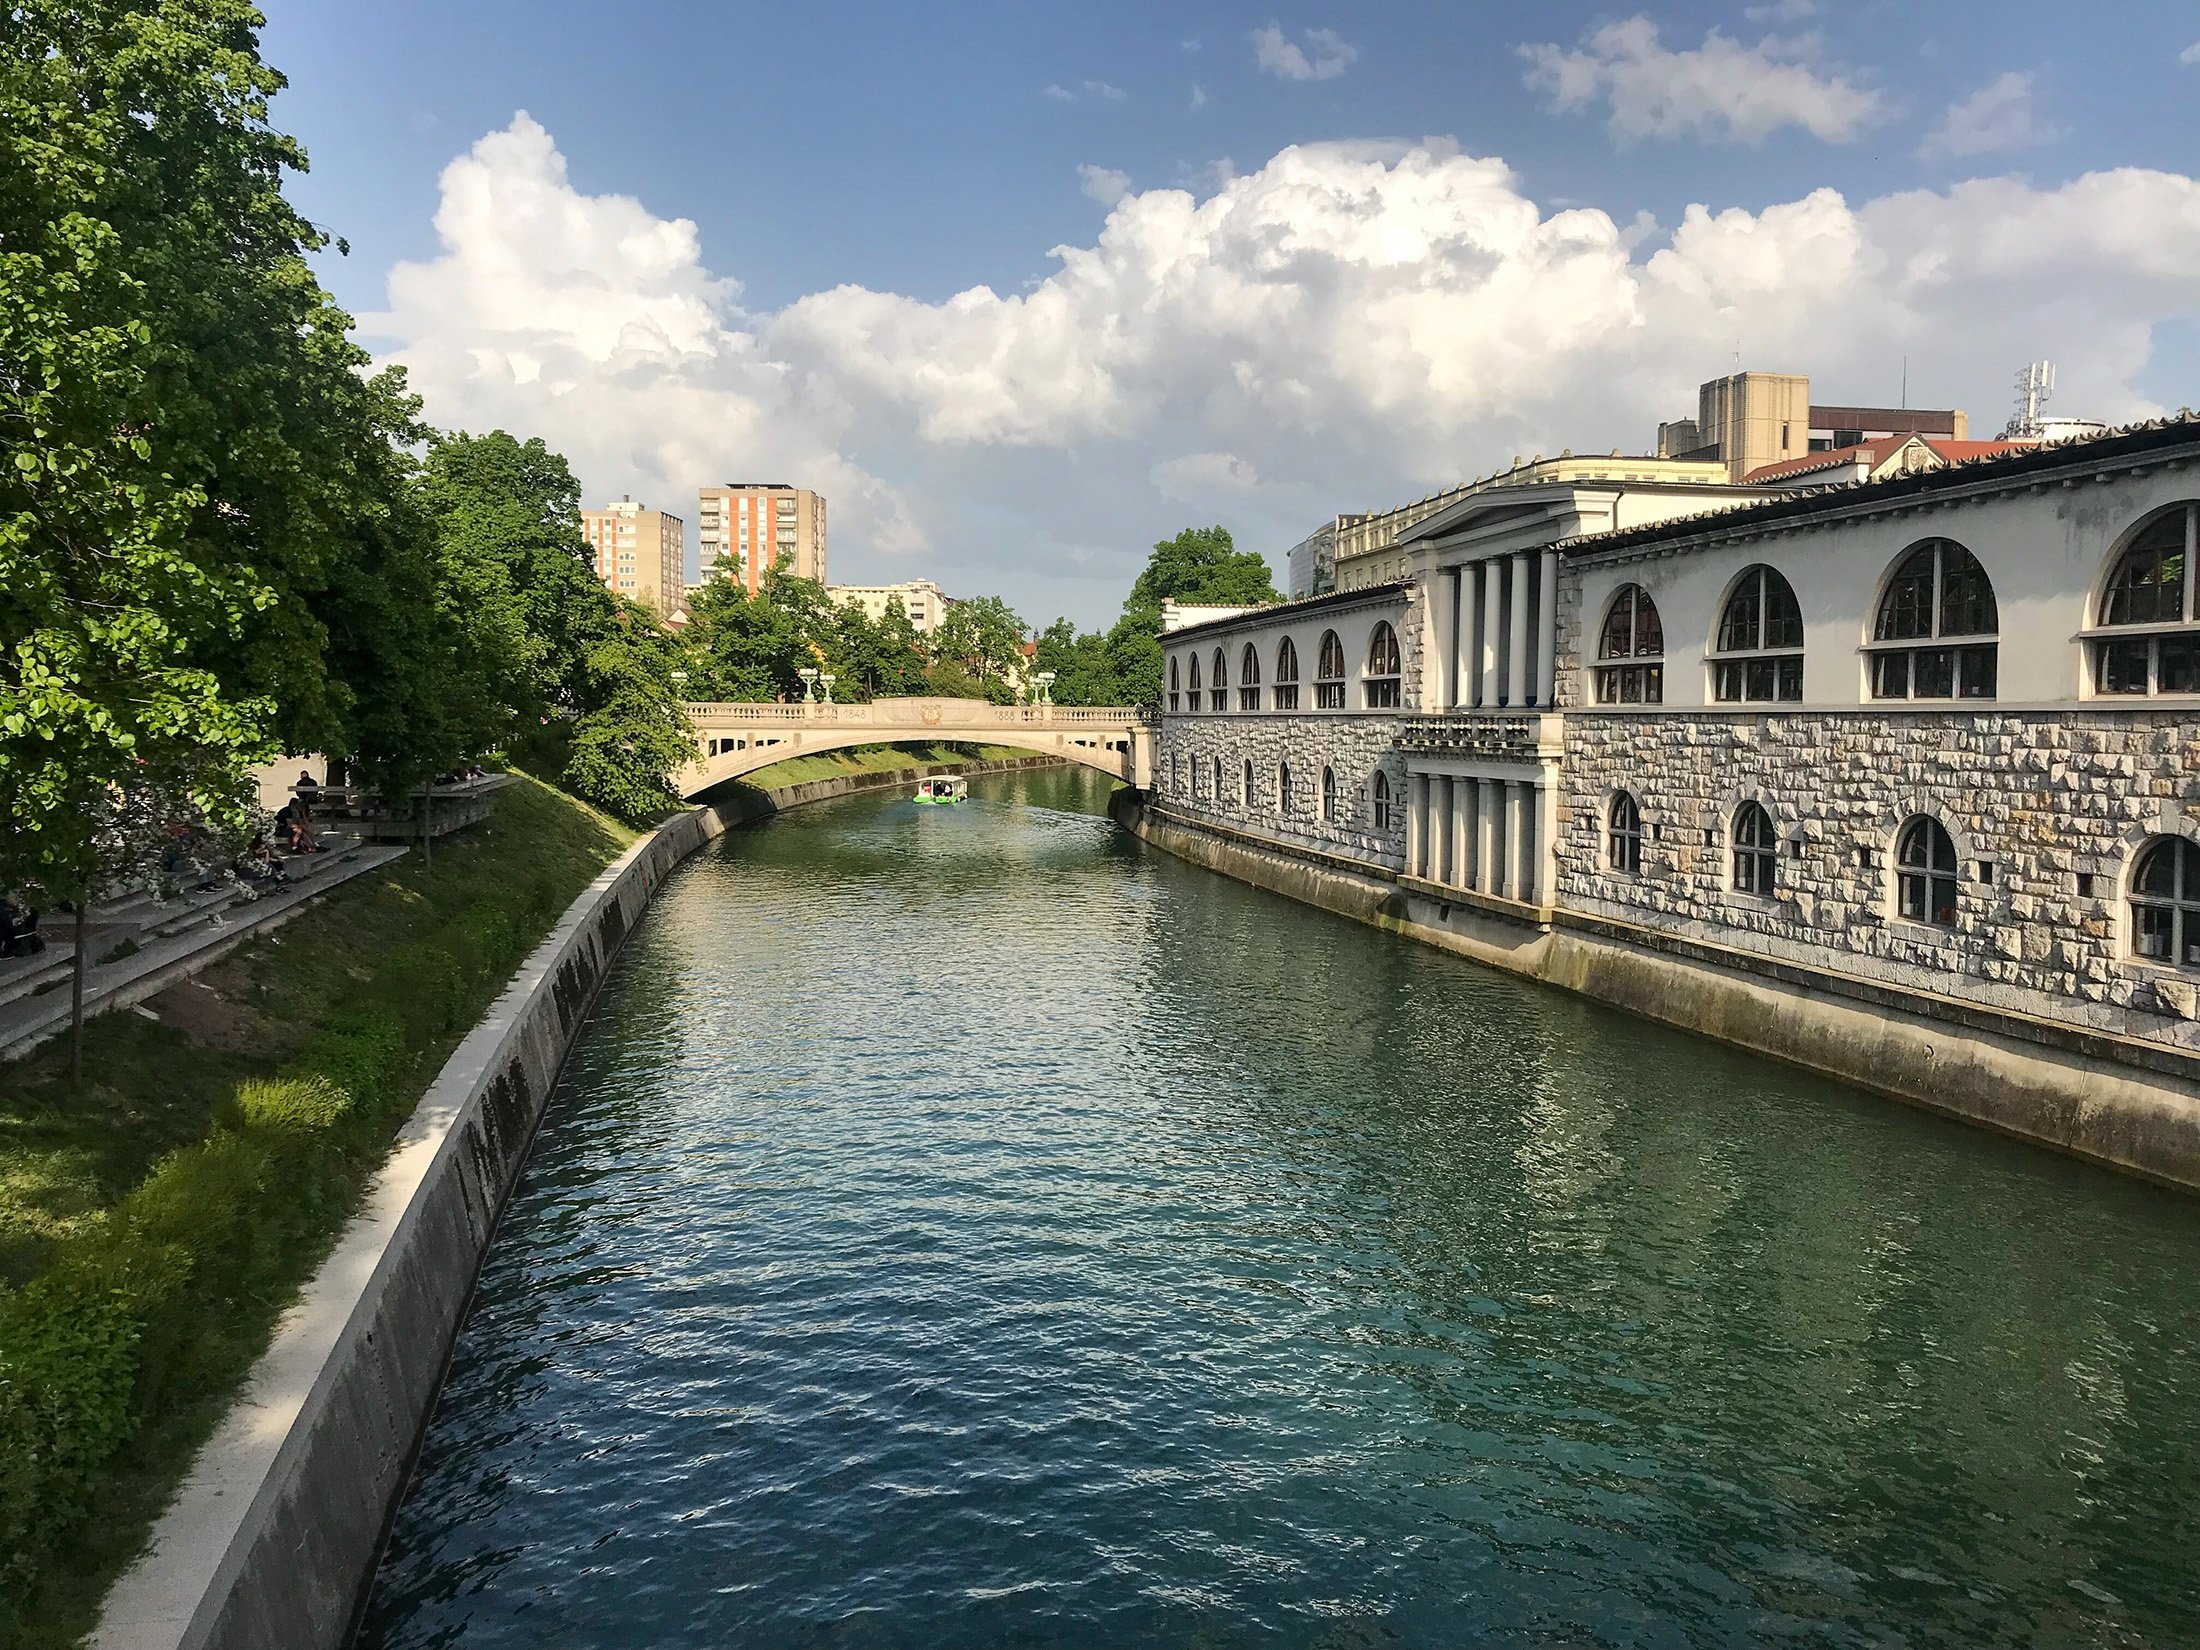 Ljubljana, whose name seems difficult to pronounce, can impress you with its lush nature, fun, safe streets and friendly people, in Slovenia. (Photo by Özge Şengelen)